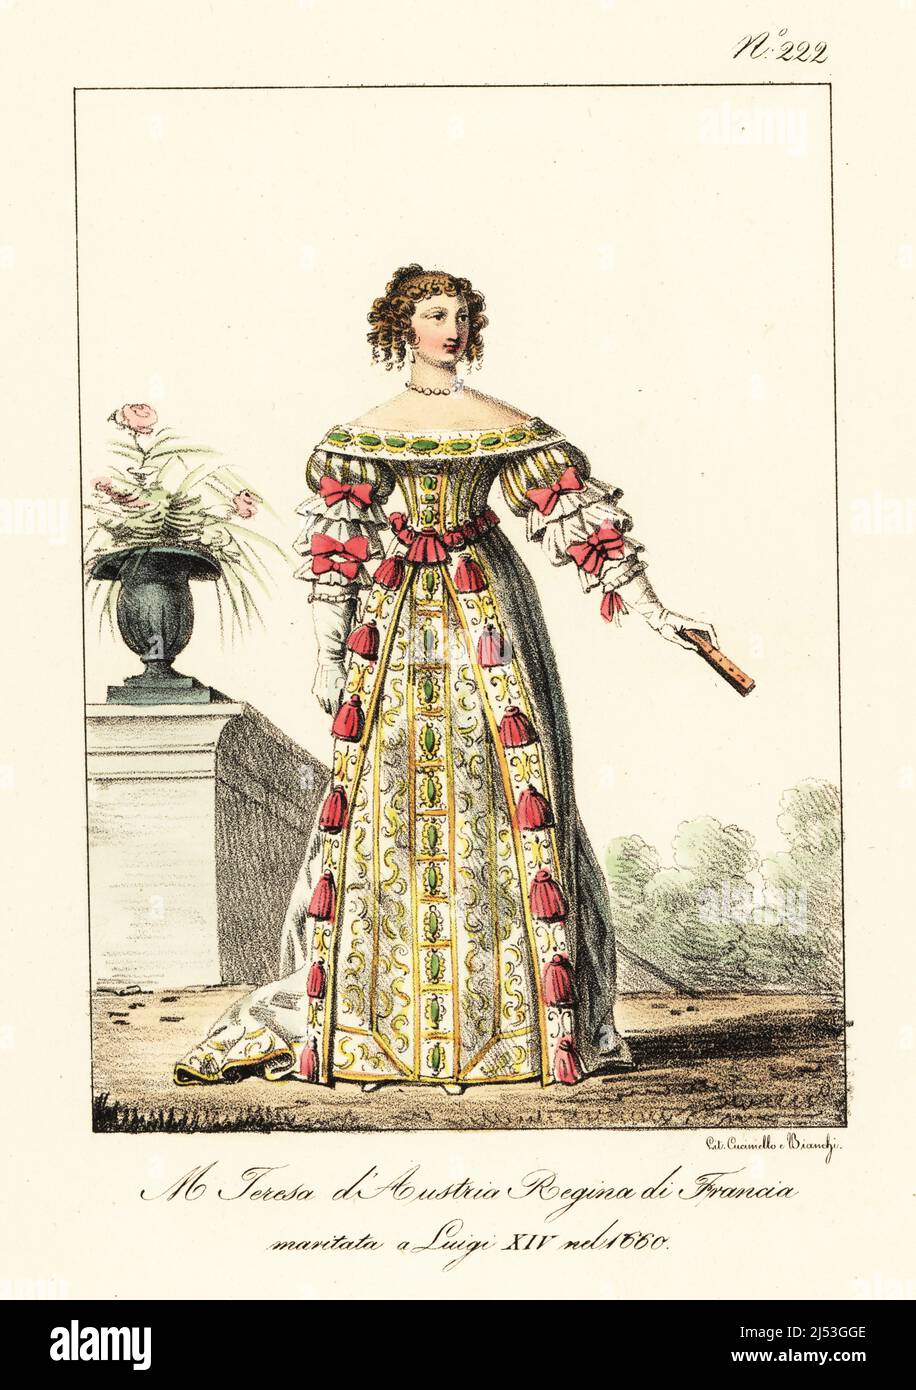 Portrait of Maria Theresa of Spain, at her marriage to French King Louis XIV in 1660. In off-the-shoulder embroidered gown and underskirt decorated with ribbons. Marie Therese d'Autriche; Reine de France, mariee a Louis XIV en 1660. Handcoloured lithograph by Lorenzo Bianchi and Domenico Cuciniello after Hippolyte Lecomte from Costumi civili e militari della monarchia francese dal 1200 al 1820, Naples, 1825. Italian edition of Lecomte’s Civilian and military costumes of the French monarchy from 1200 to 1820. Stock Photo